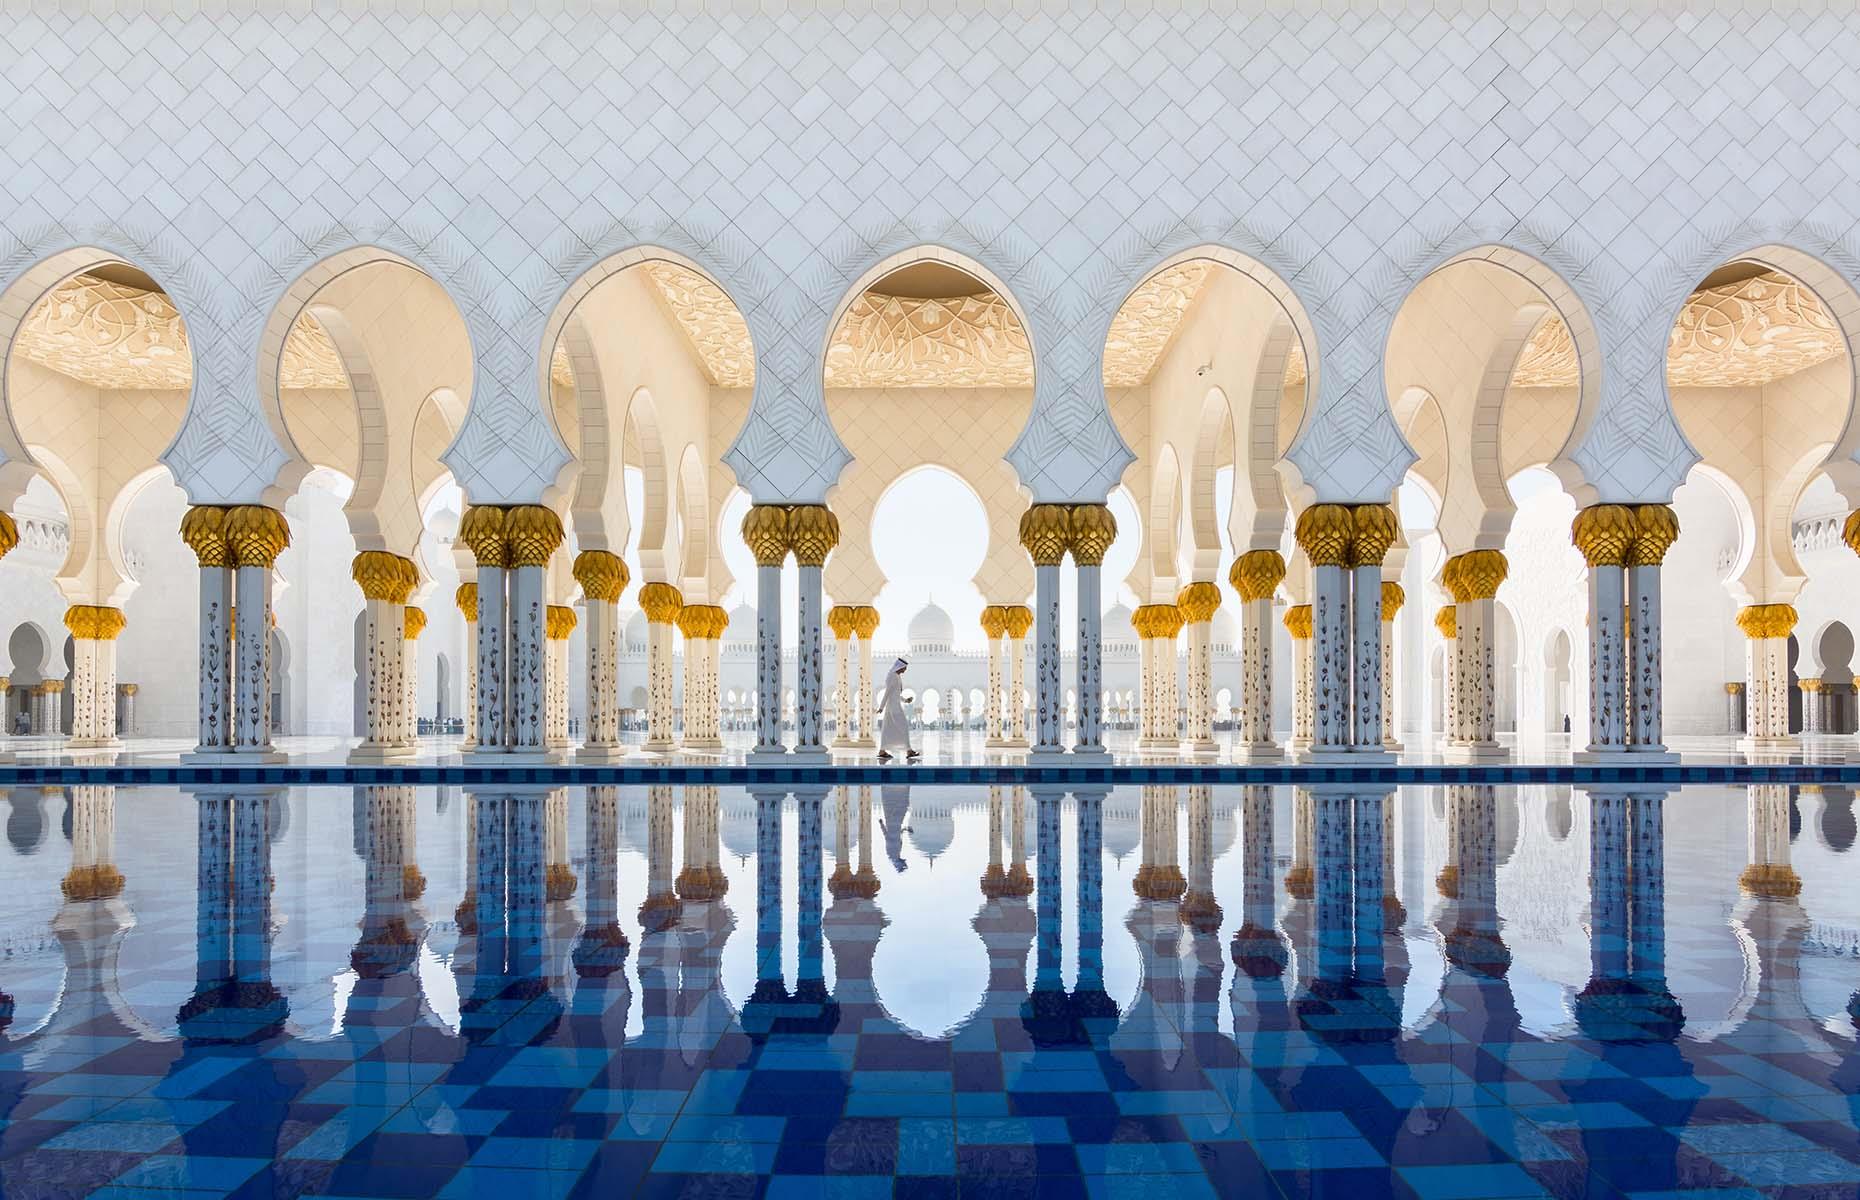 <p>Sheikh Zayed Grand Mosque is staggering in its scale, made up of 82 domes and four 348-feet-high (106m) minarets. It is one of the only mosques in the region open to non-Muslims and deliberately references Mamluk, Ottoman, Fatimid, Moorish and Indo-Islamic styles in its design. The carpet in the main prayer hall is the world’s largest, hand-knotted by 1,300 Iranian artisans and made up of 2.3 billion knots. But it's the purity of the white marble, imported from Macedonia, and the intricacy of the gold-leaf floral inlays, that leave a lasting impression. <strong>Score: 6.76</strong></p>